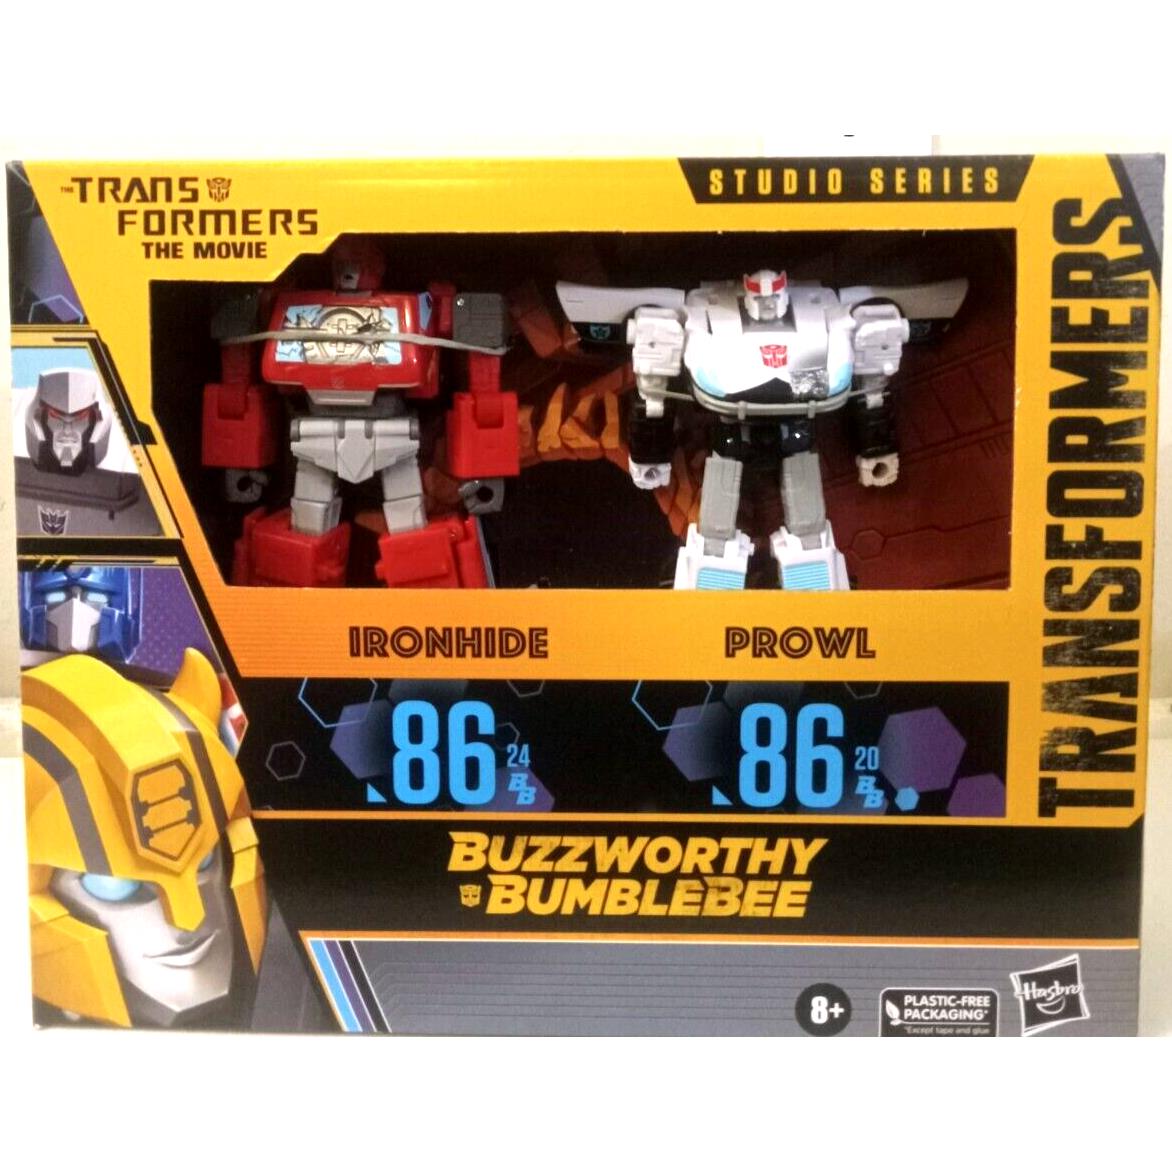 Transformers Buzzworthy Bumblebee Studio Series 86 Ironhide and Prowl Misb